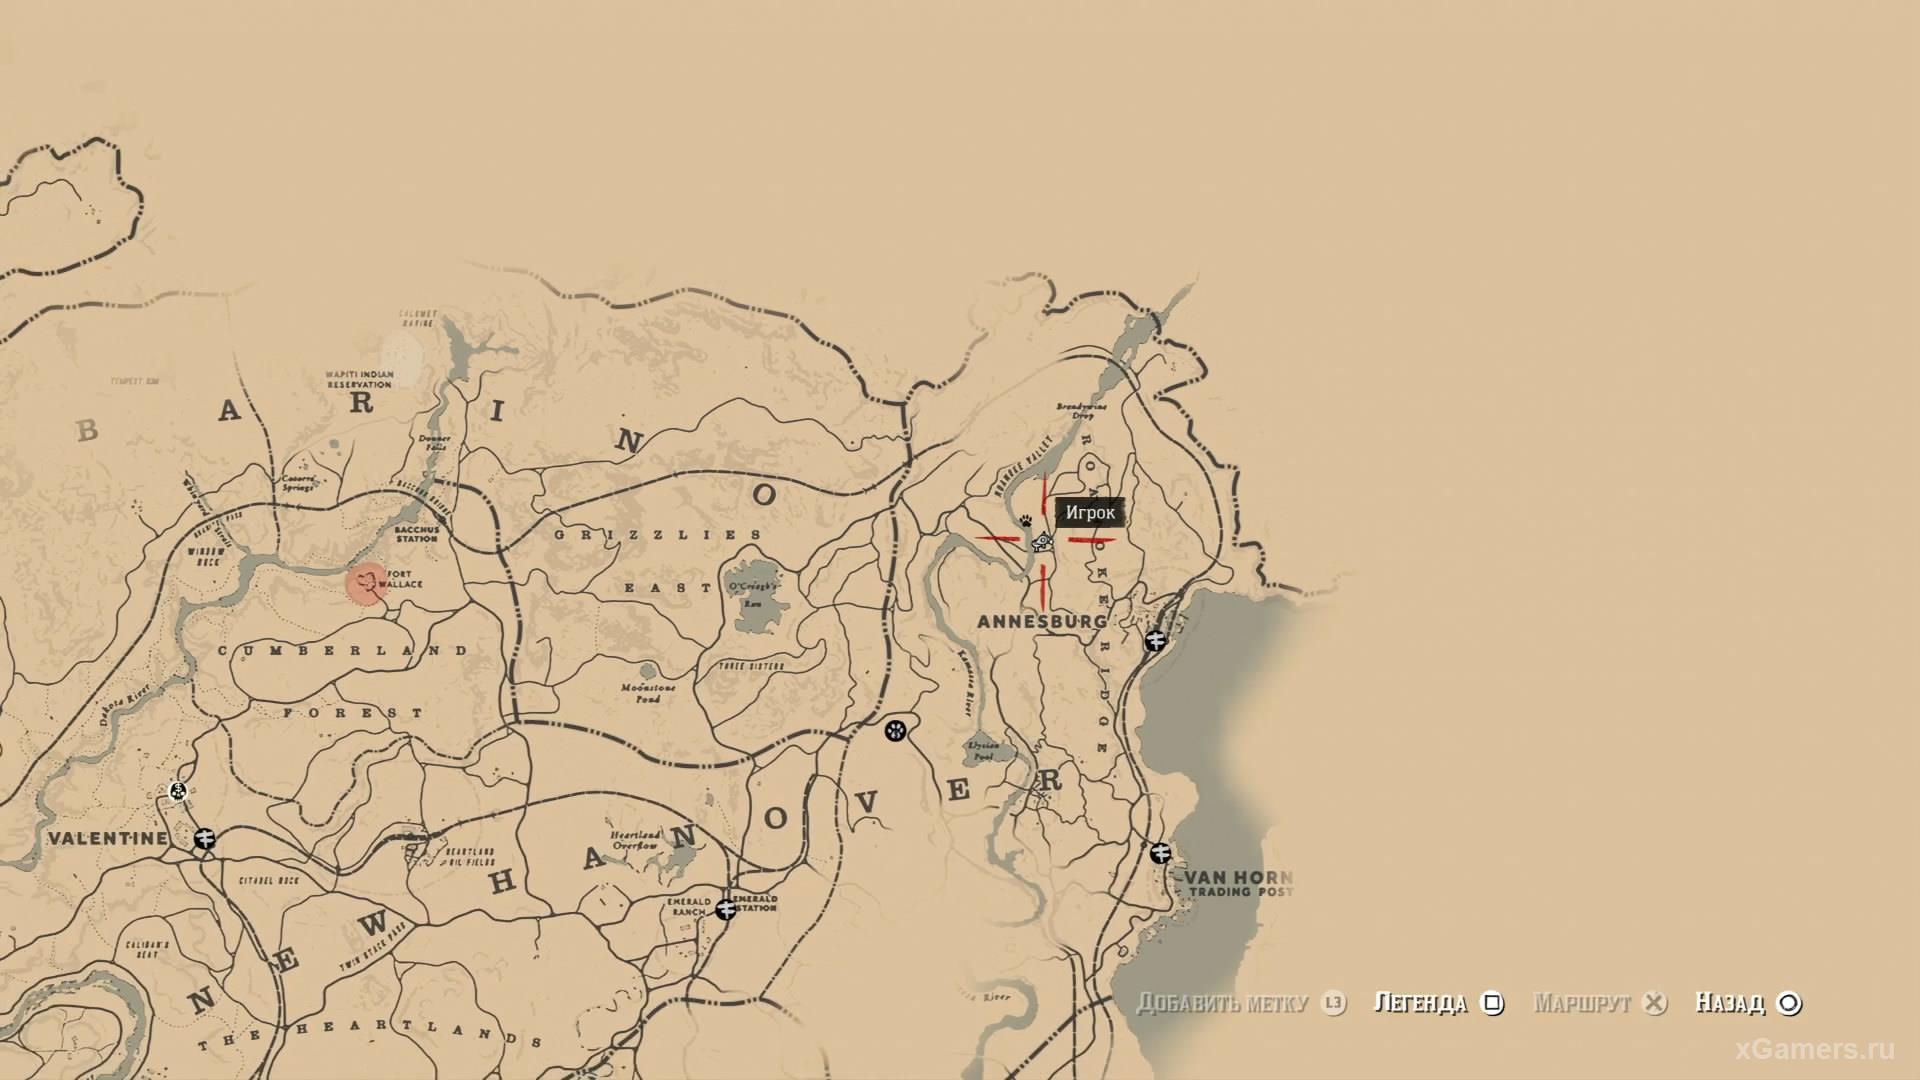 The first catcher is on the river bank in the vicinity of Annesburg.